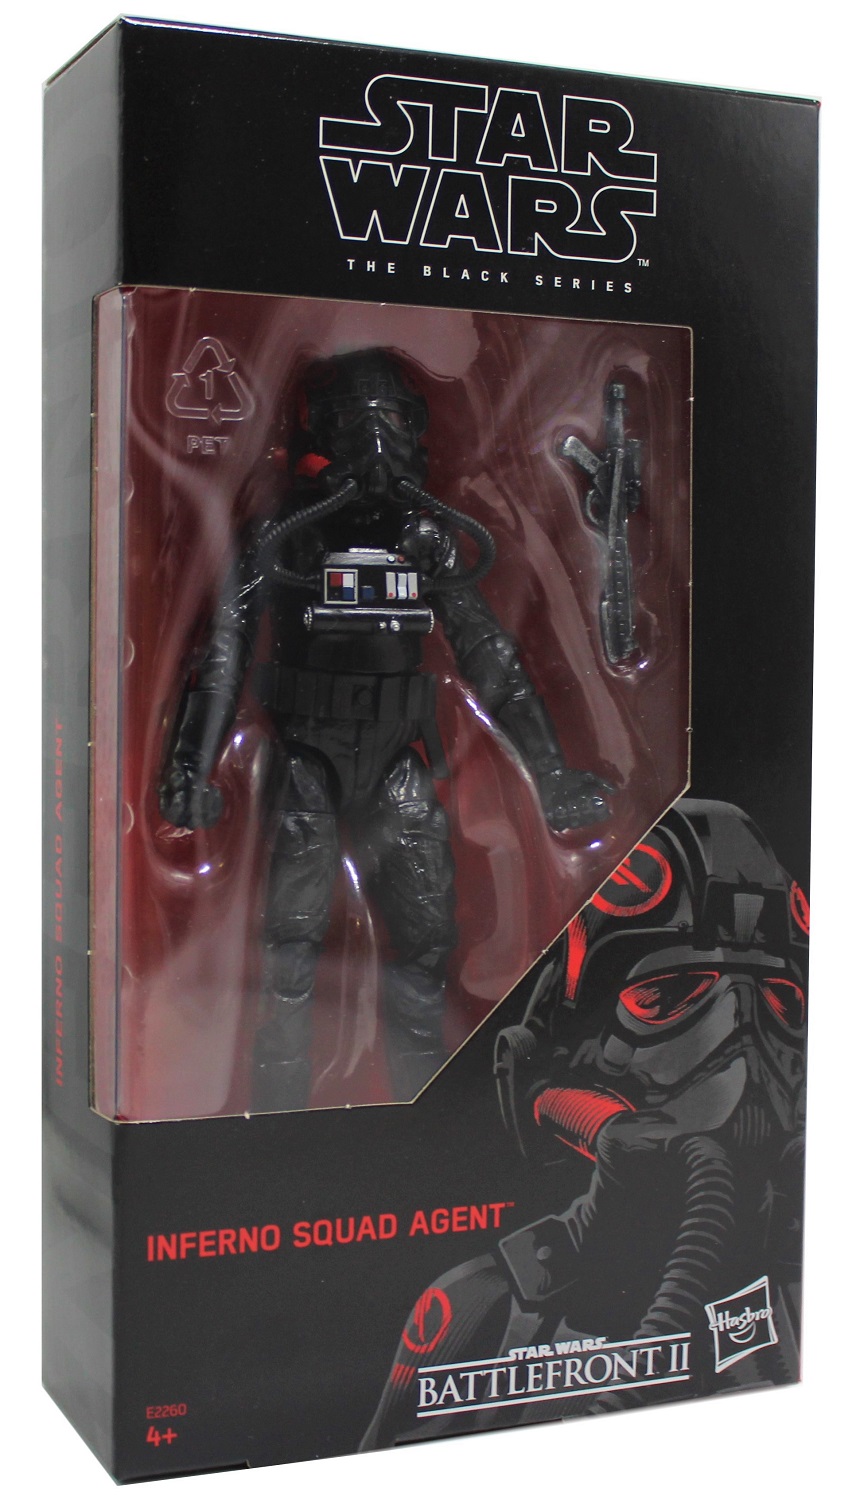 Star Wars The Black Series - Inferno Squad Agent Actionfigur 15 cm